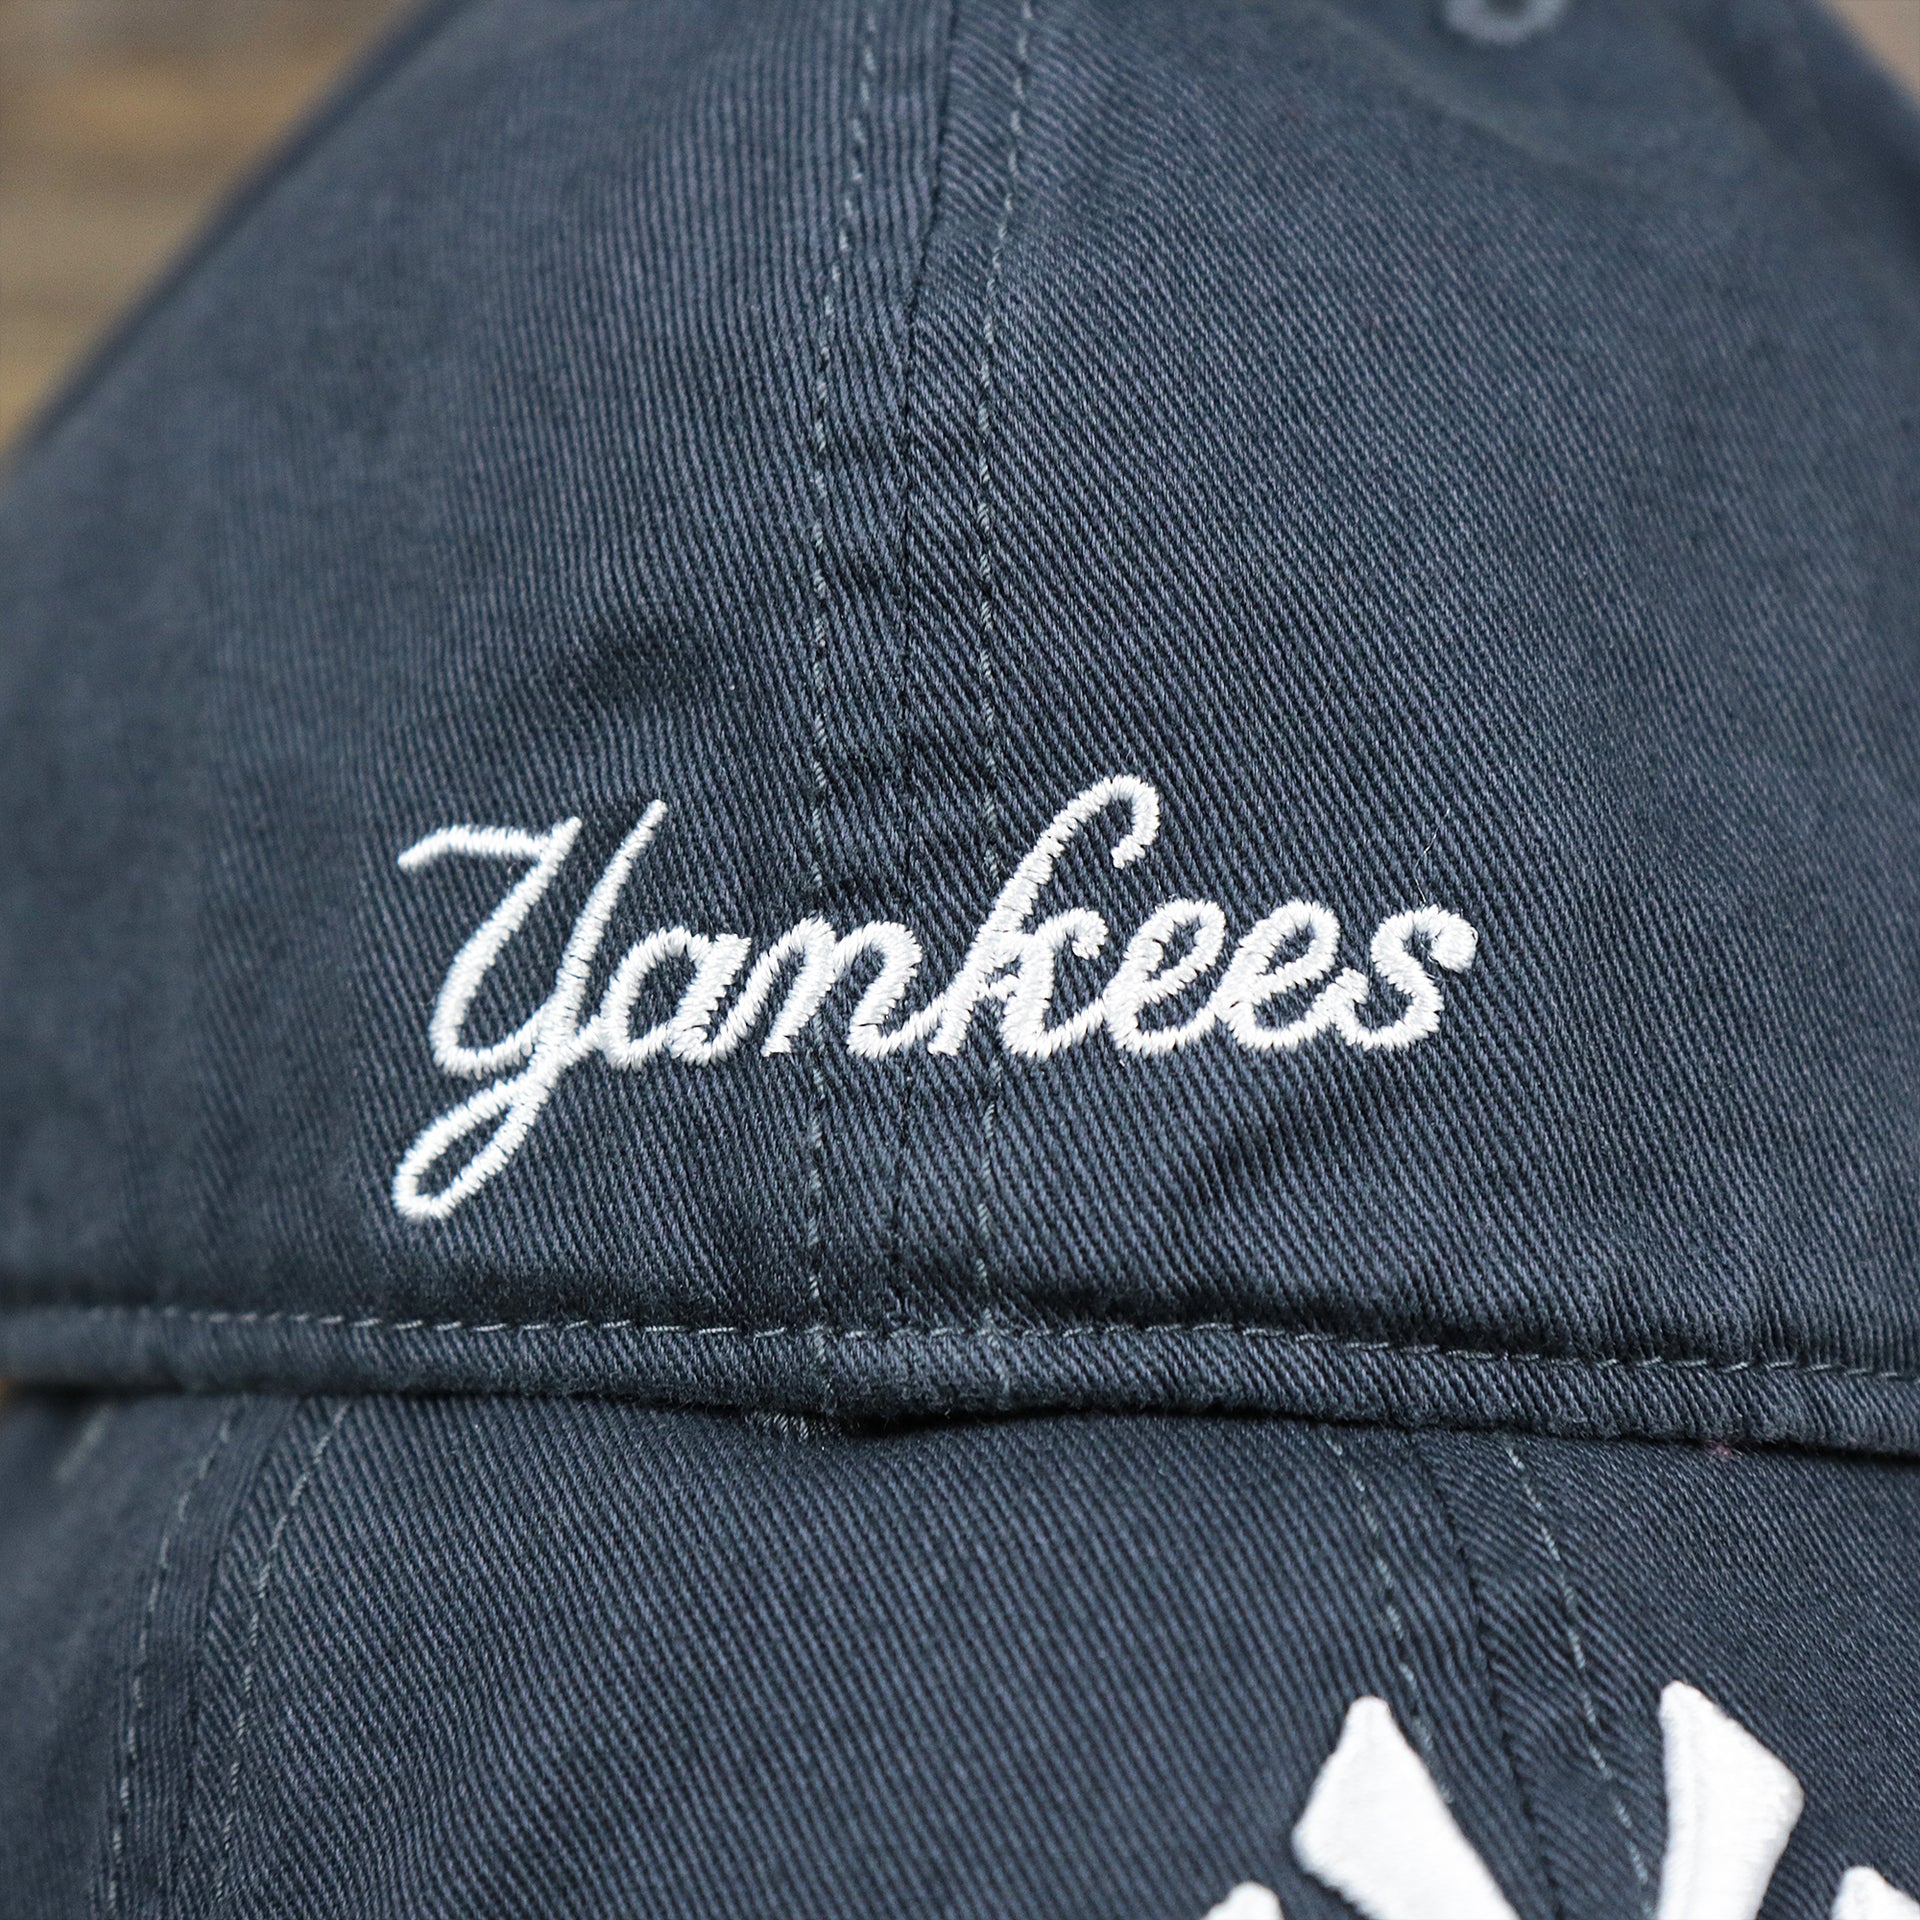 The Yankees Wordmark on the Cooperstown New York Yankees Green Bottom Yankees Wordmark Fitted Cap | Vintage Navy Fitted Cap